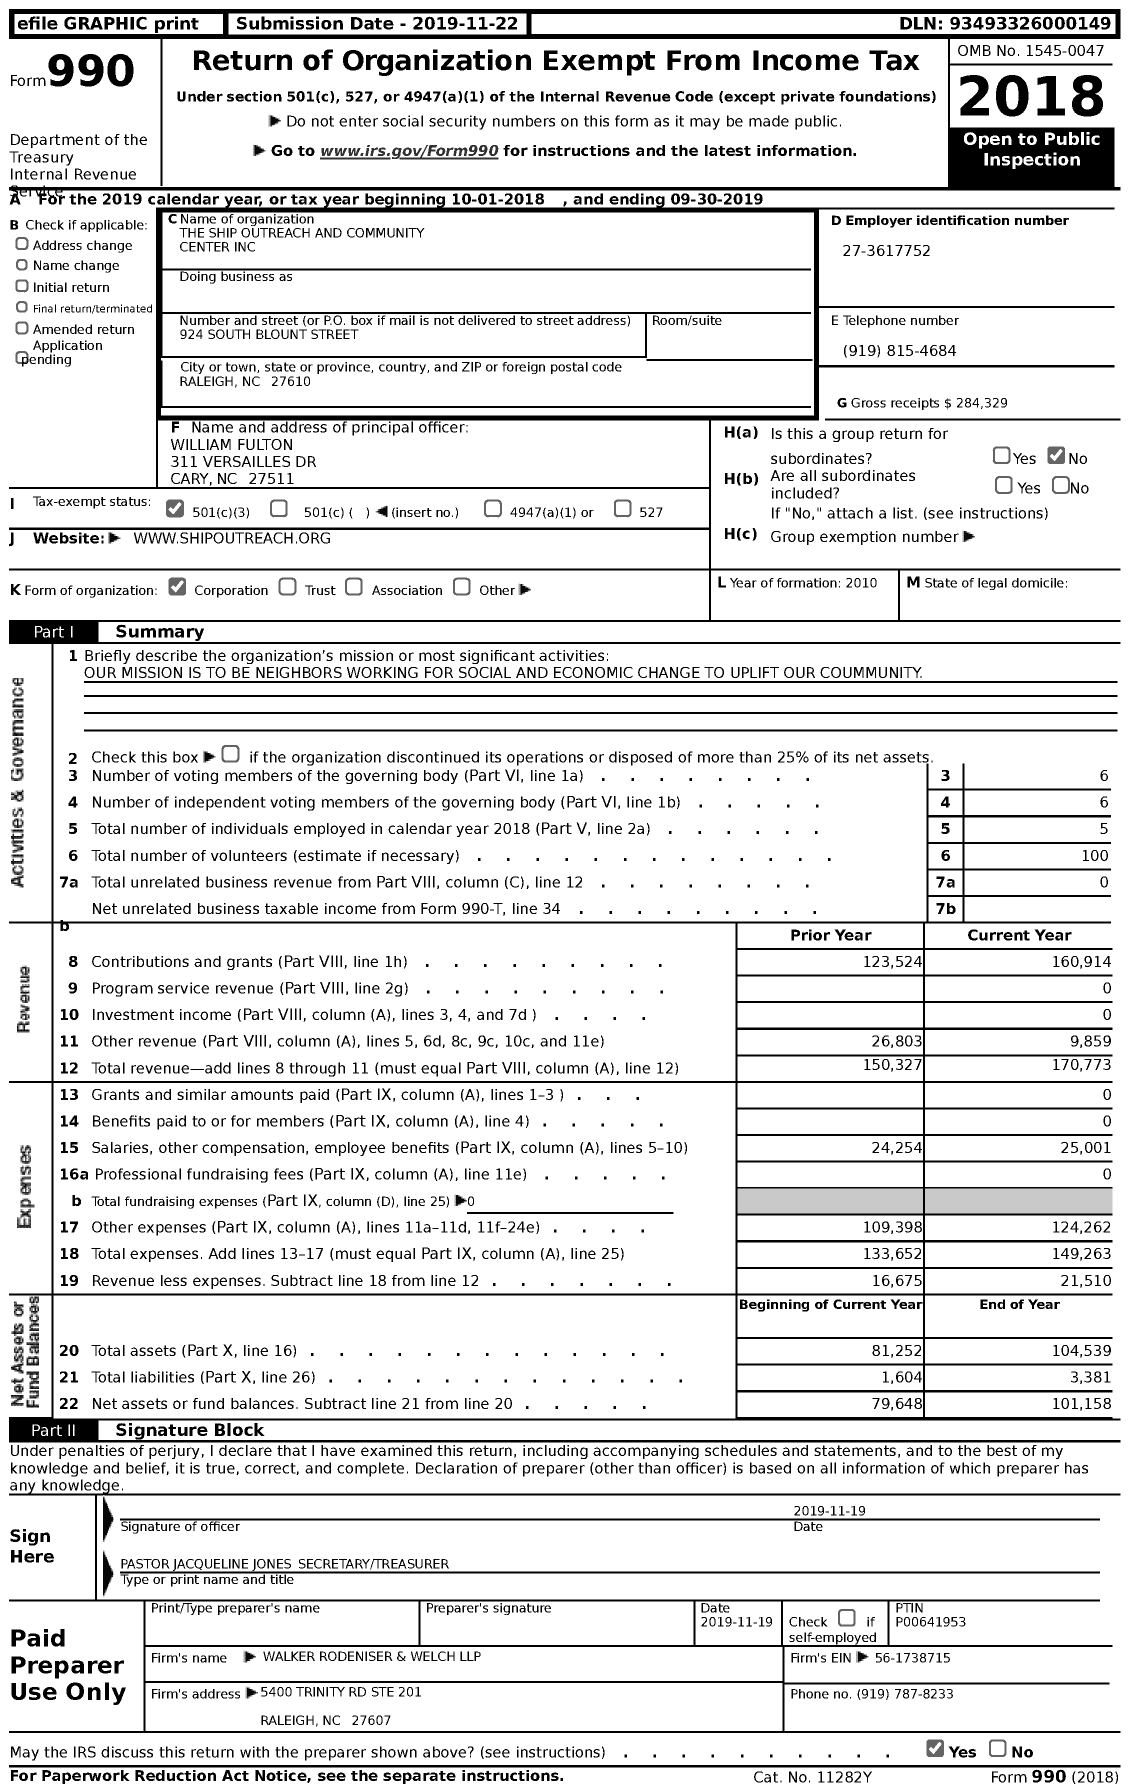 Image of first page of 2018 Form 990 for The Ship Outreach and Community Center